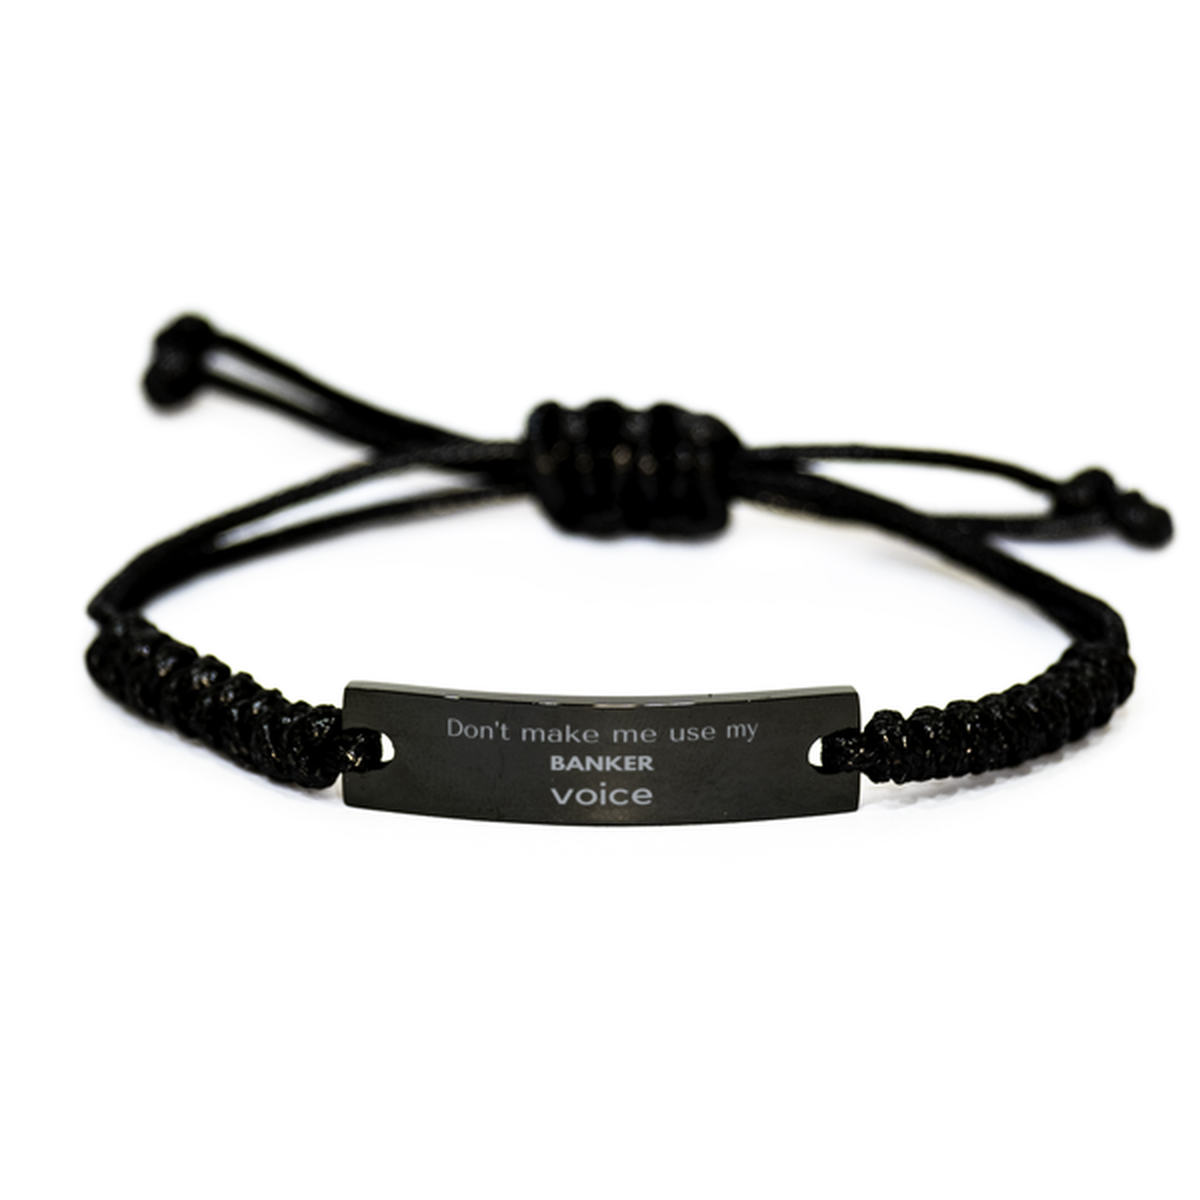 Don't make me use my Banker voice, Sarcasm Banker Gifts, Christmas Banker Black Rope Bracelet Birthday Unique Gifts For Banker Coworkers, Men, Women, Colleague, Friends